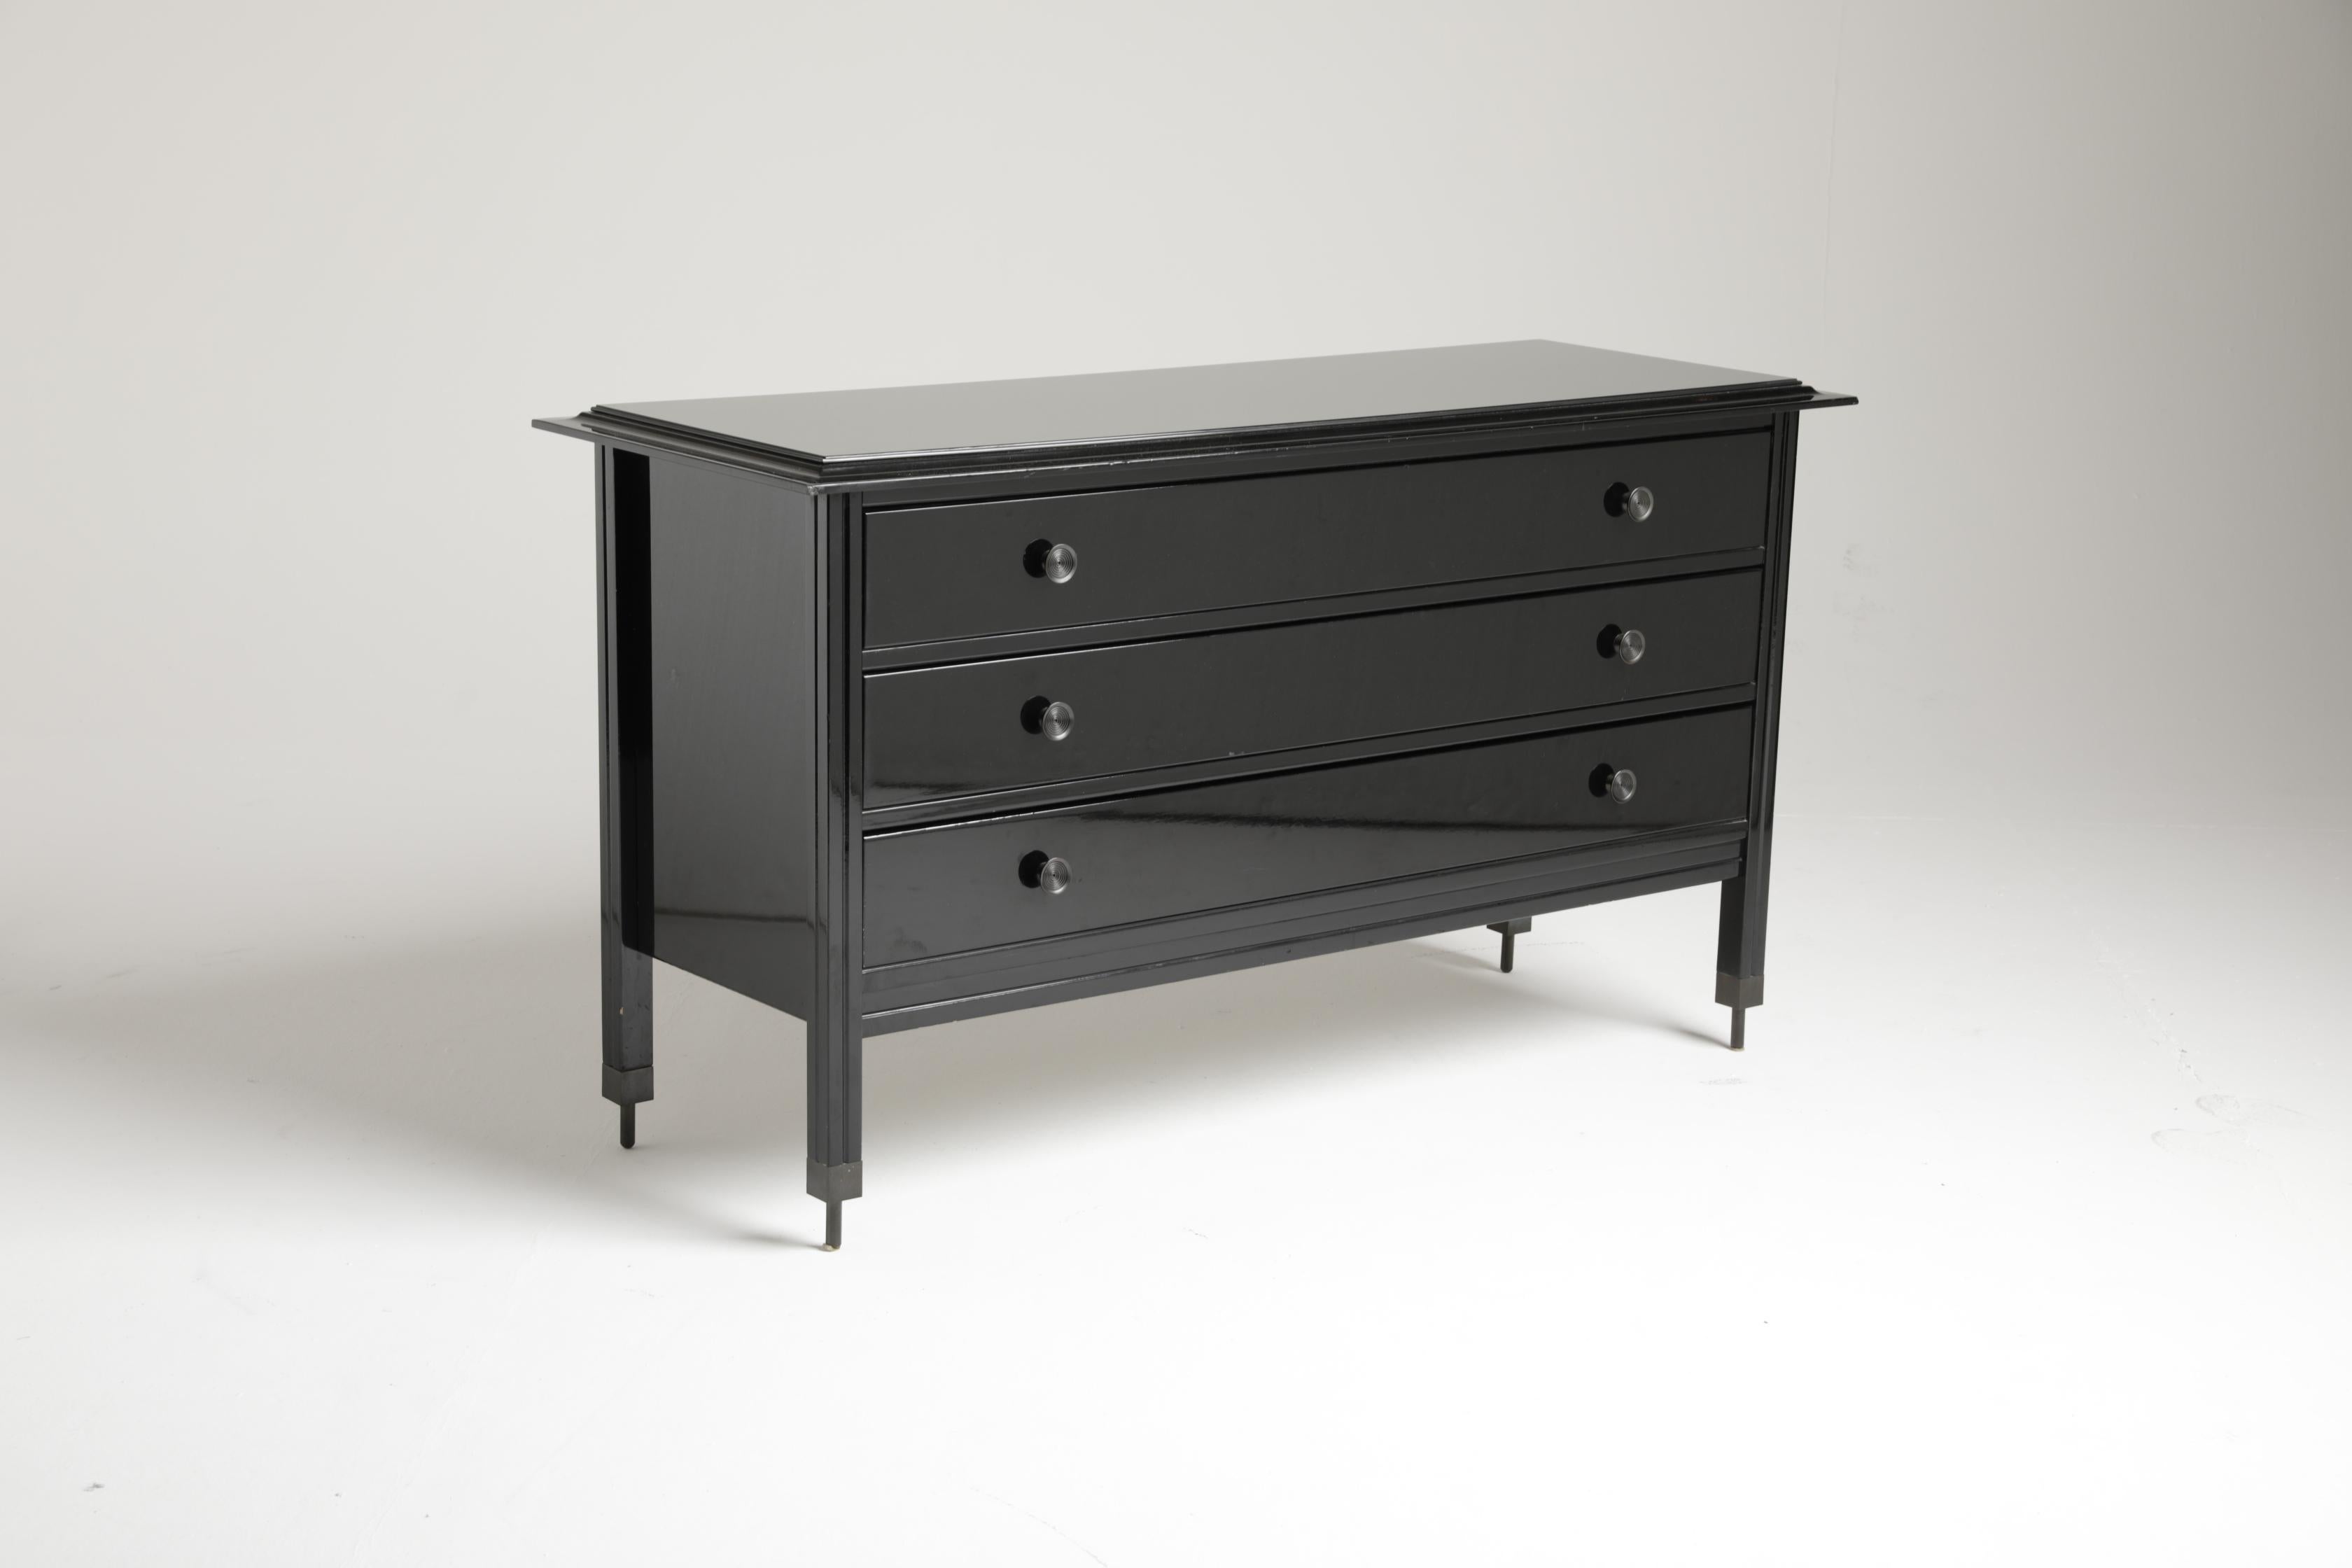 Carlo de Carli
(Milan, 1910 - 1999)
Model D154 chest of drawers
in Black lacquered wood, knobs and tips in brass
Sormani production, Italy, 1963

Italian Mid-Century Dresser by the famous Italian Architect and designer Carlo de Carli, Sormani